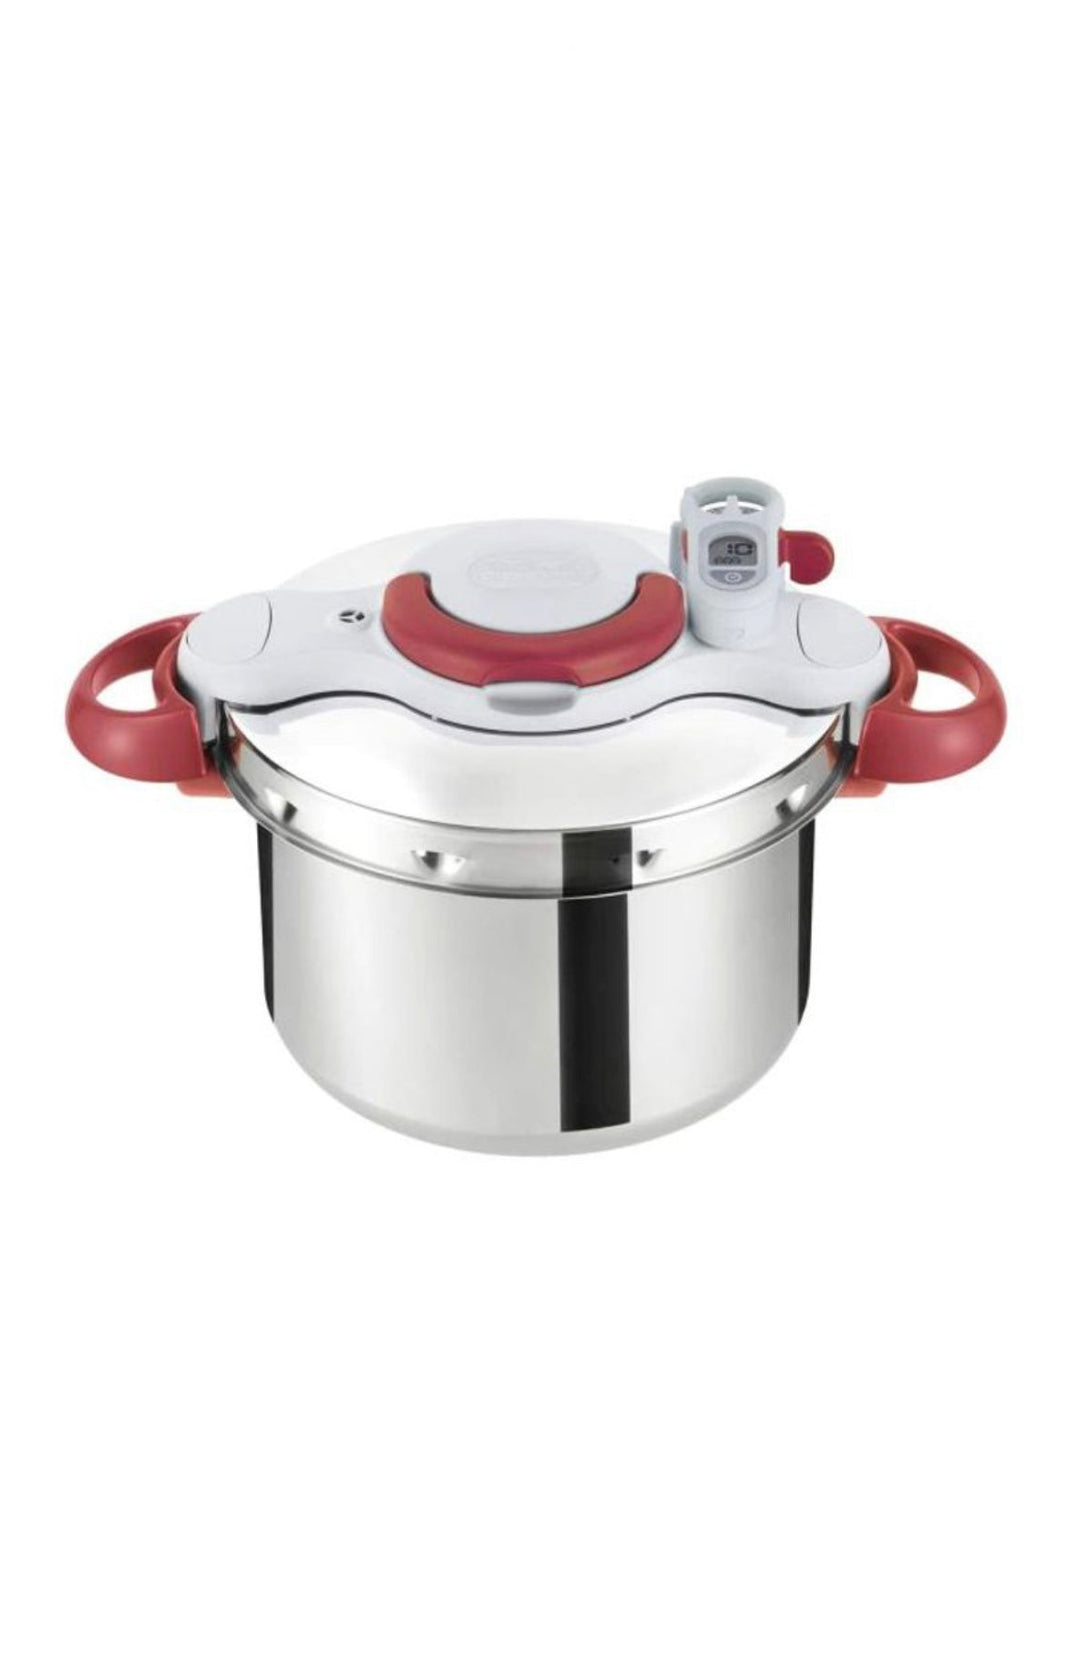 Tefal Clipso Pressure Cooker Silver/Red 9litre